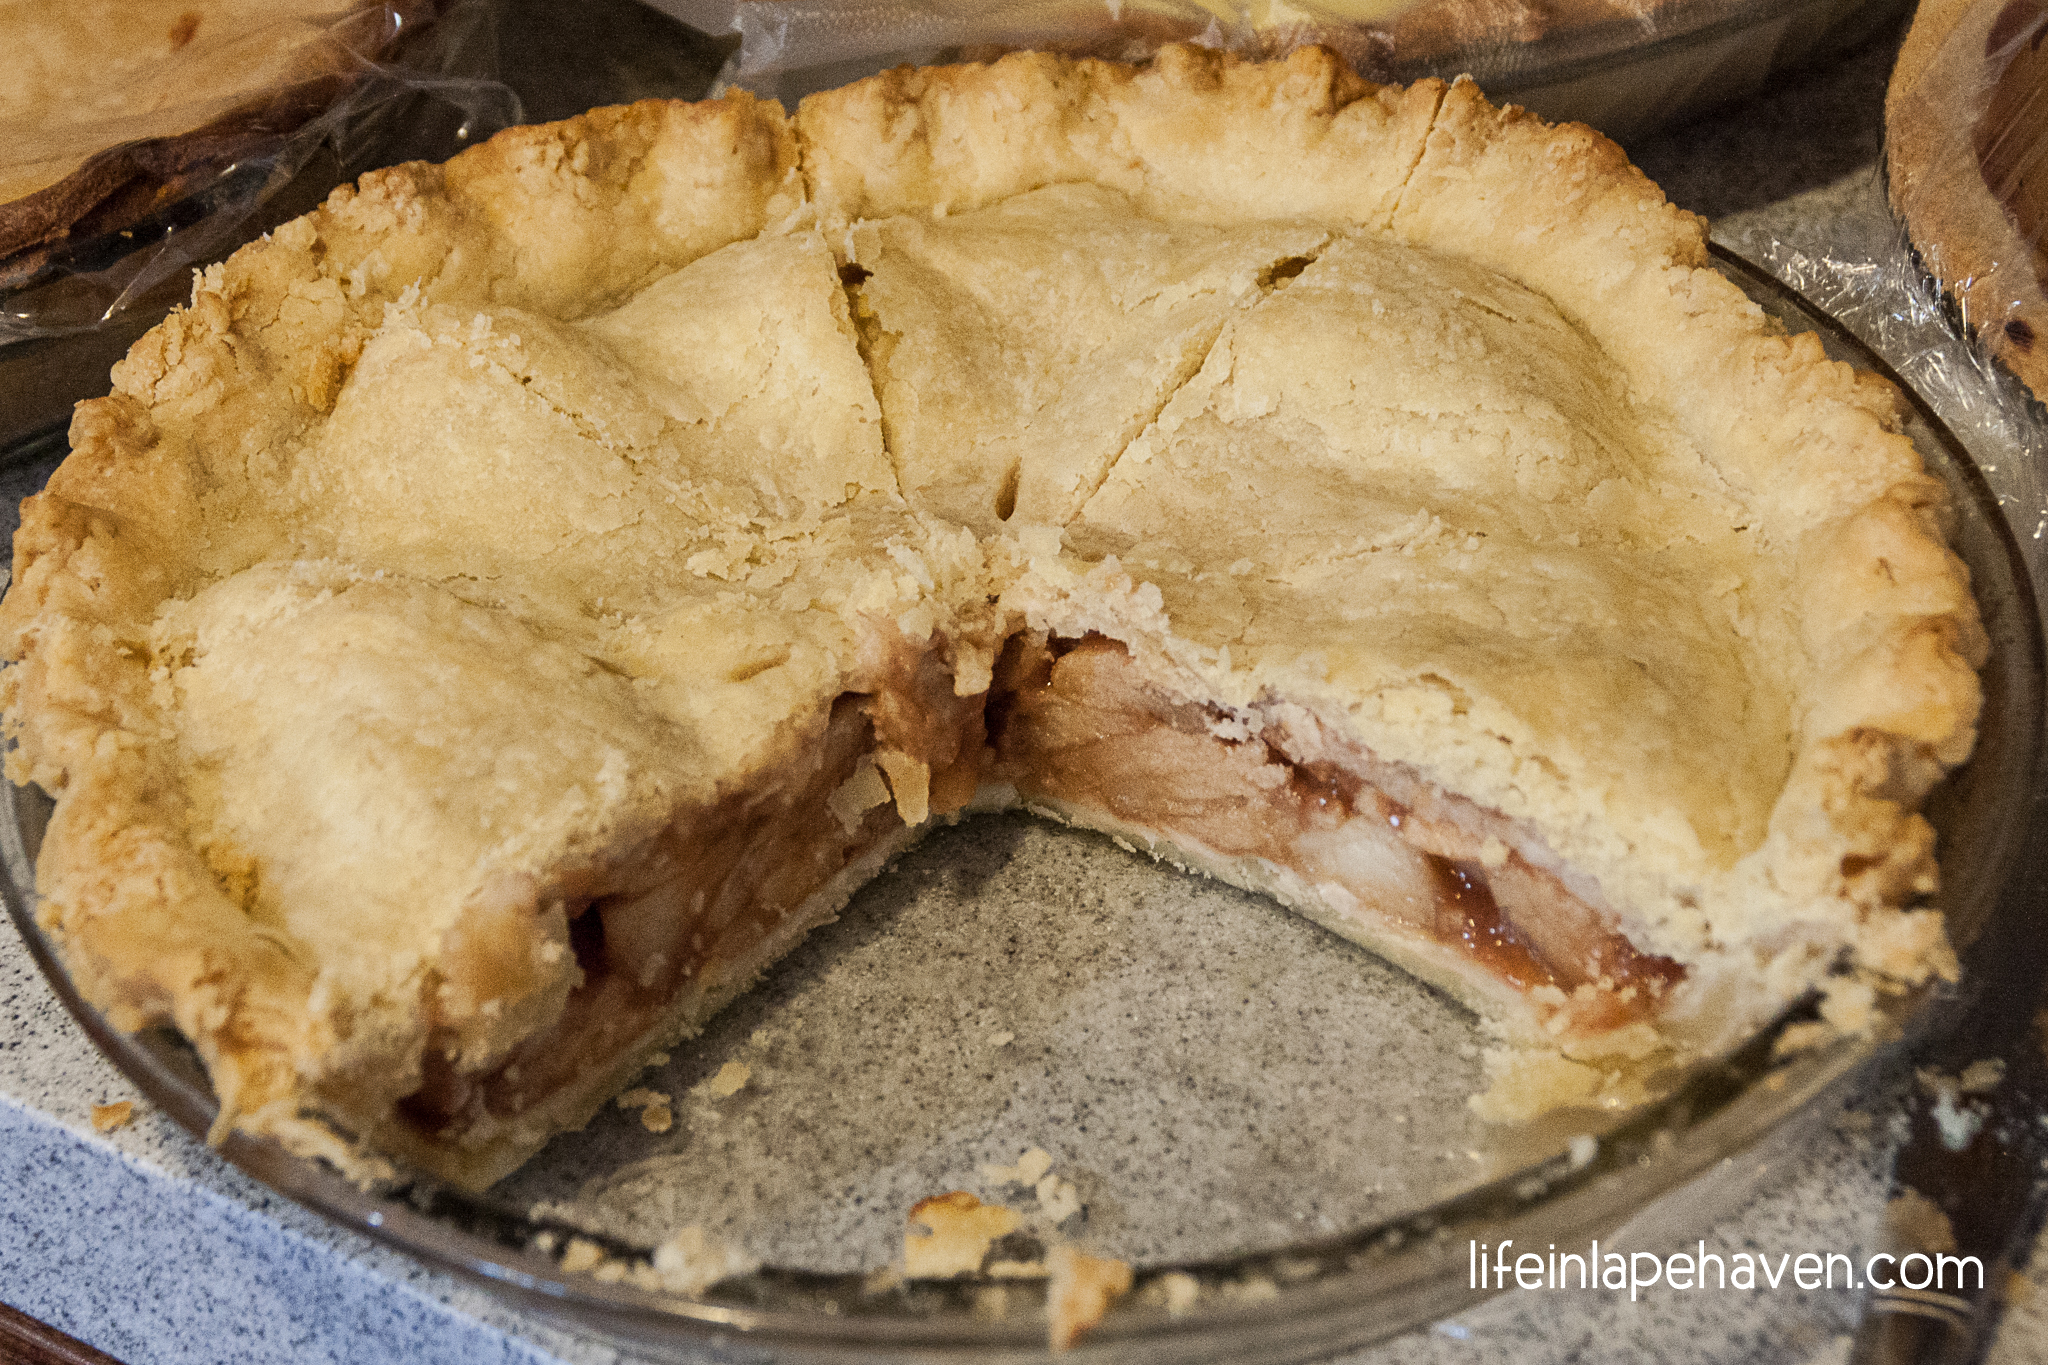 The Legacy in an Apple Pie - A Delicious, Easy Recipe Four Generations in the Making, Life in Lape Haven. This simple, delicious apple pie recipe combines one of my great-grandma's apple pie filling with another great-grandma's pie crust recipe.